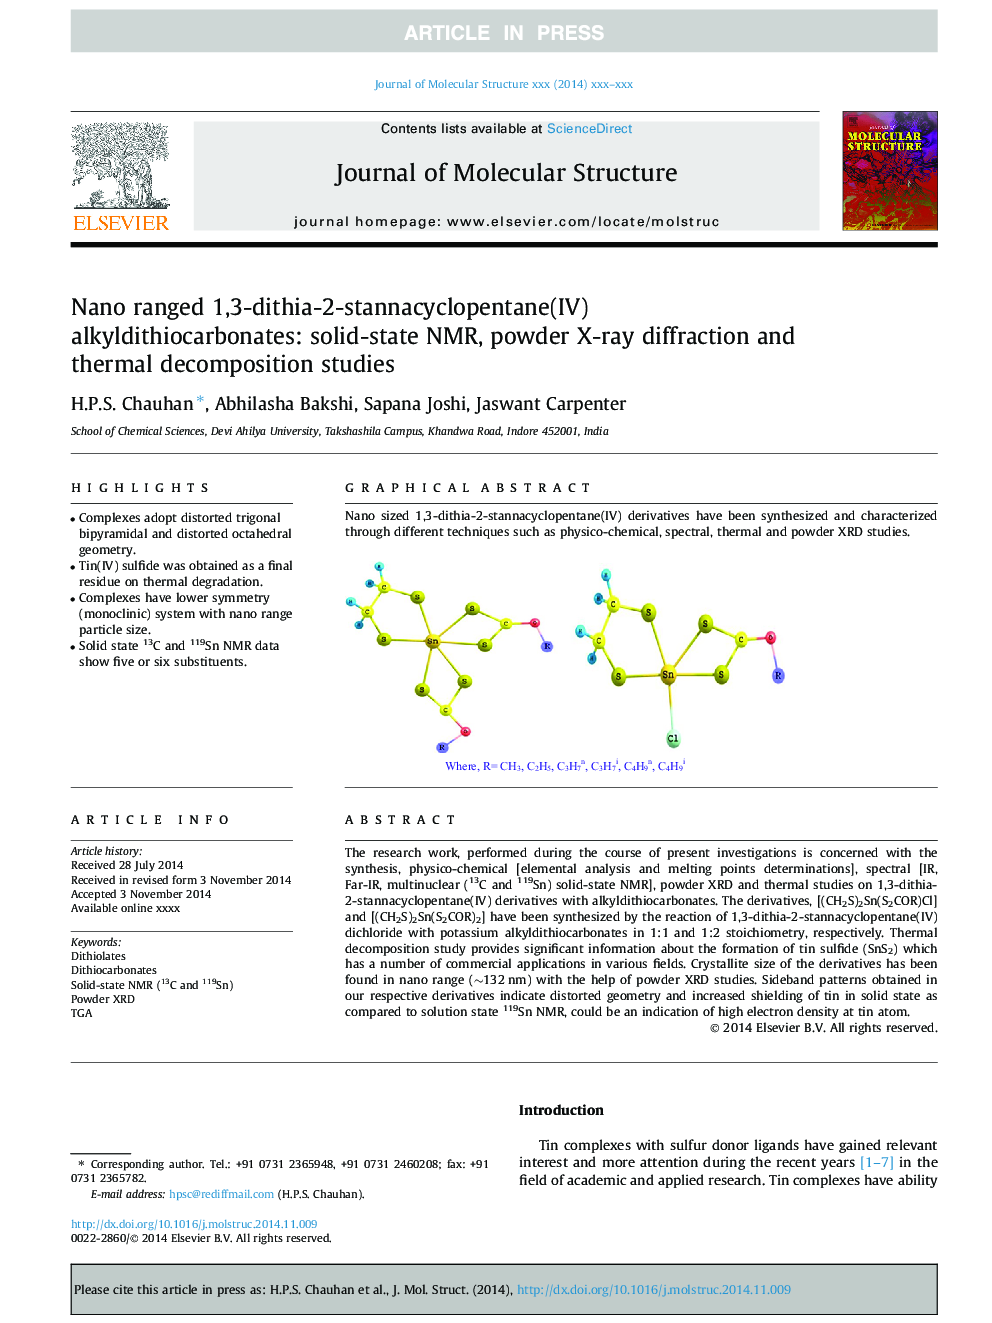 Nano ranged 1,3-dithia-2-stannacyclopentane(IV) alkyldithiocarbonates: solid-state NMR, powder X-ray diffraction and thermal decomposition studies